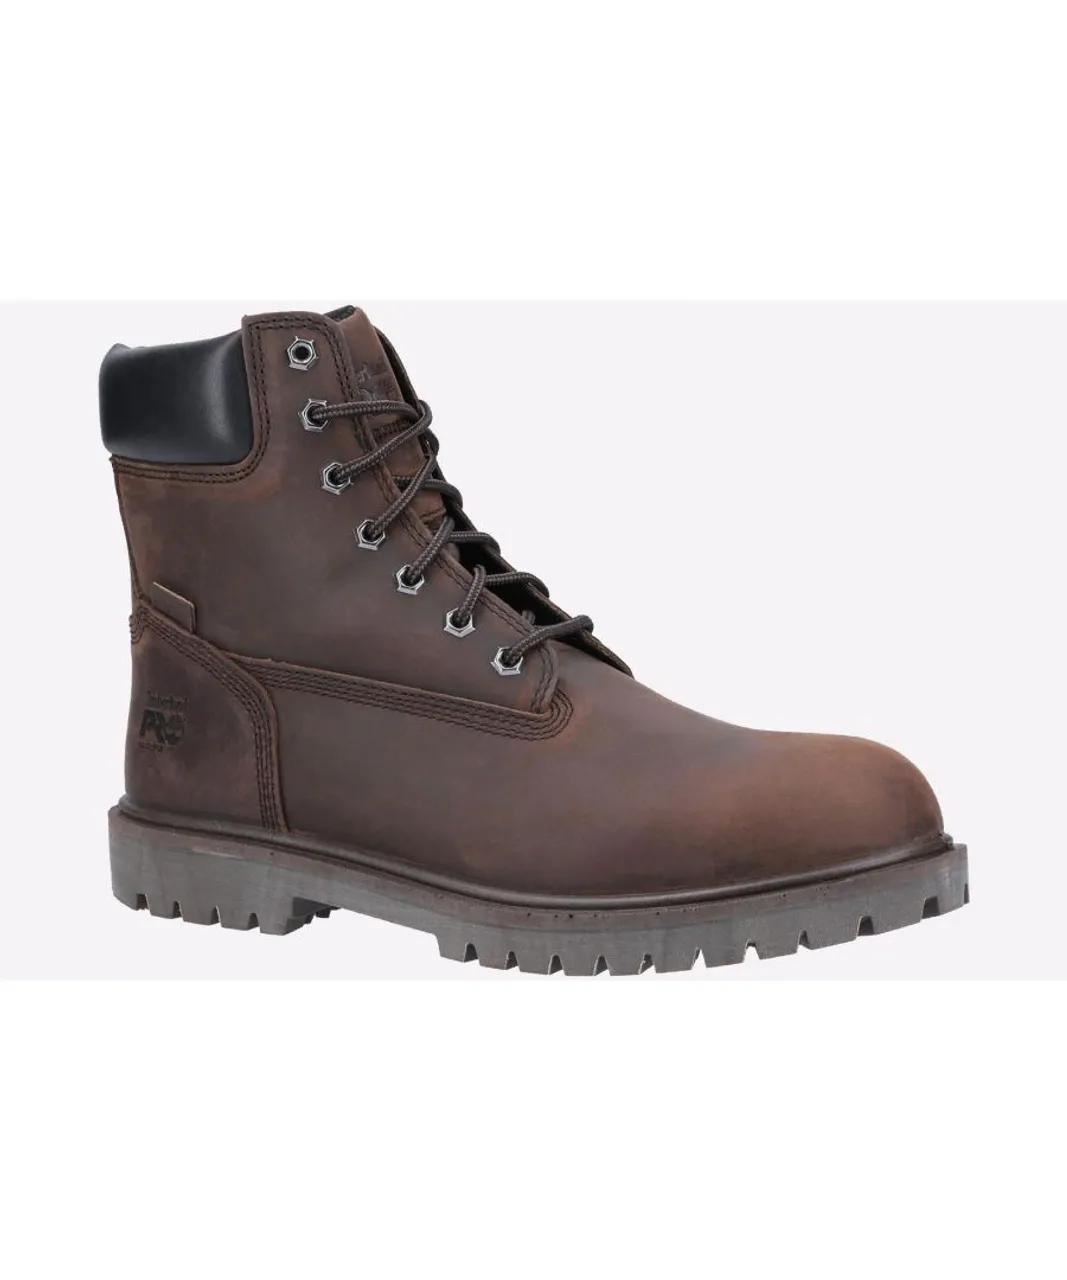 Timberland Pro Iconic Safety Toe Work Boot Mens - Brown